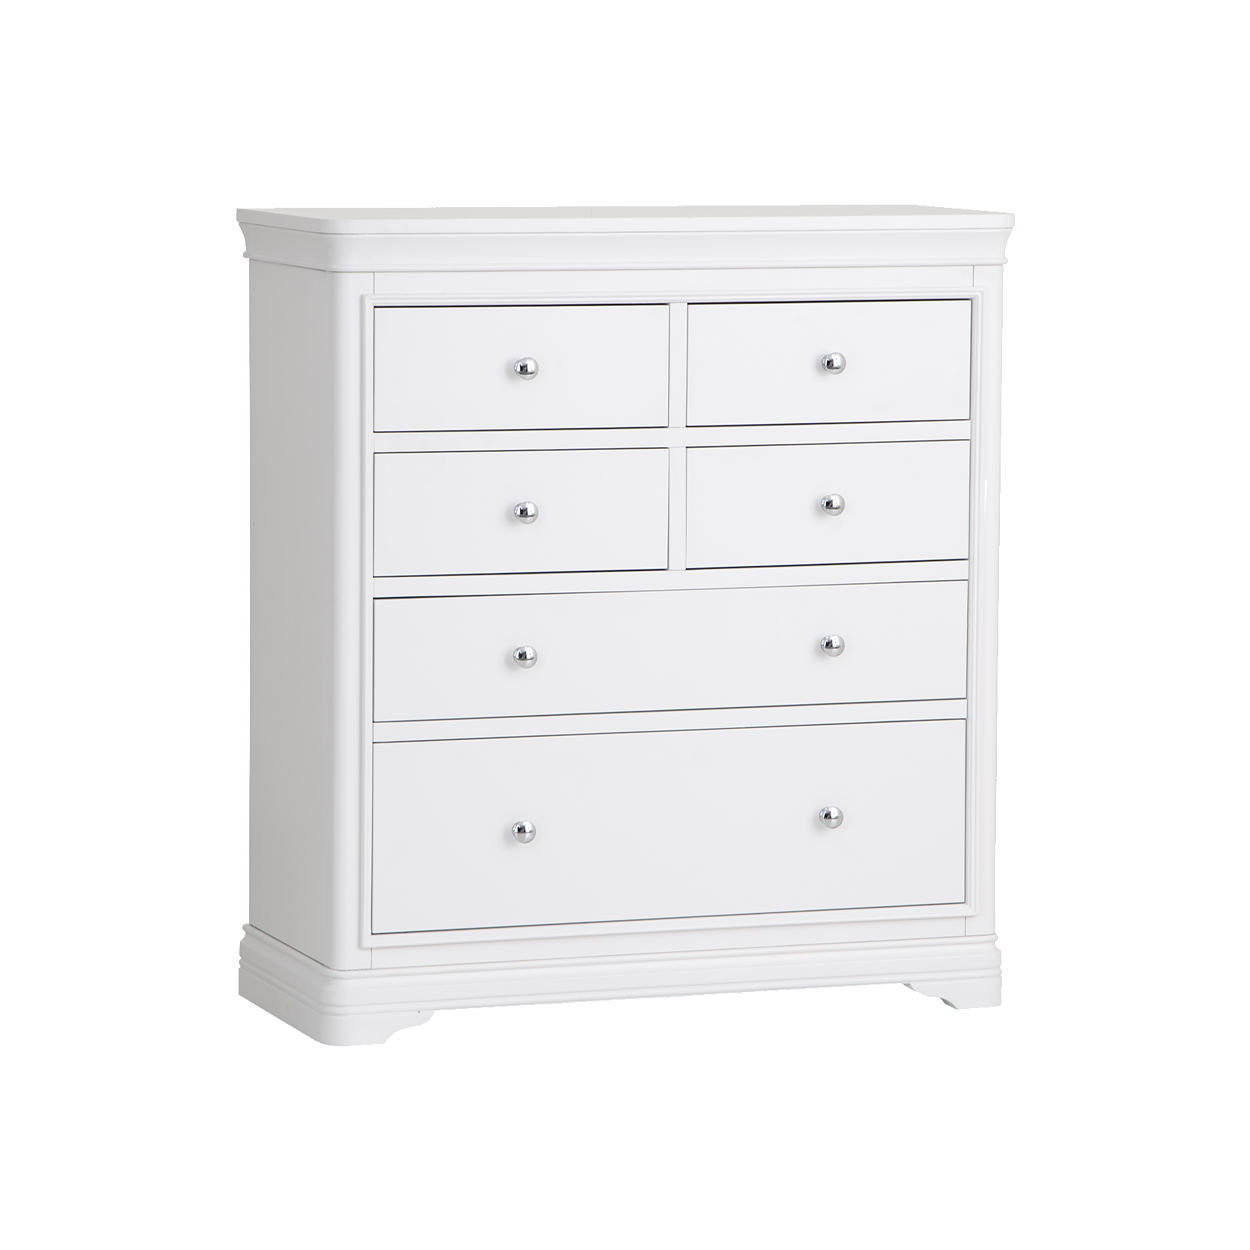 Sabrina 4 Over 2 Chest of Drawers